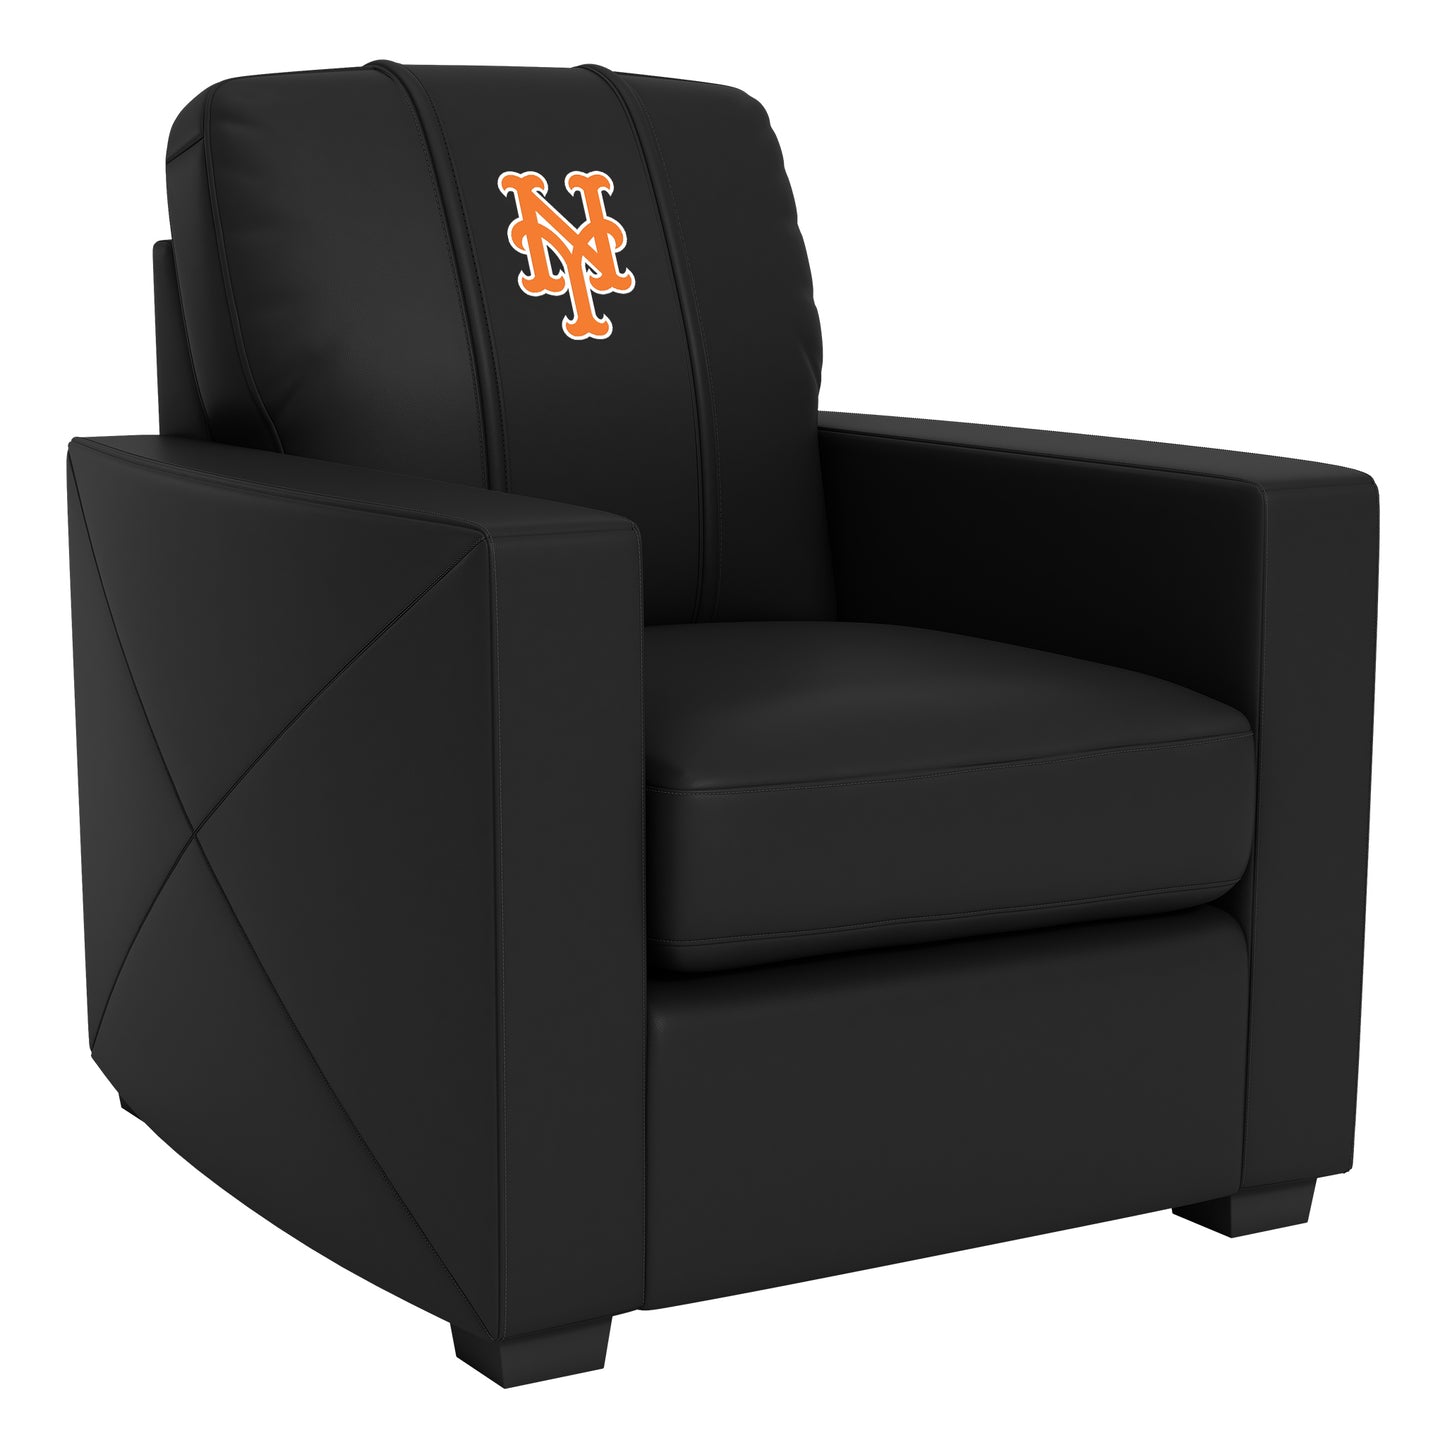 Silver Club Chair with New York Mets Secondary